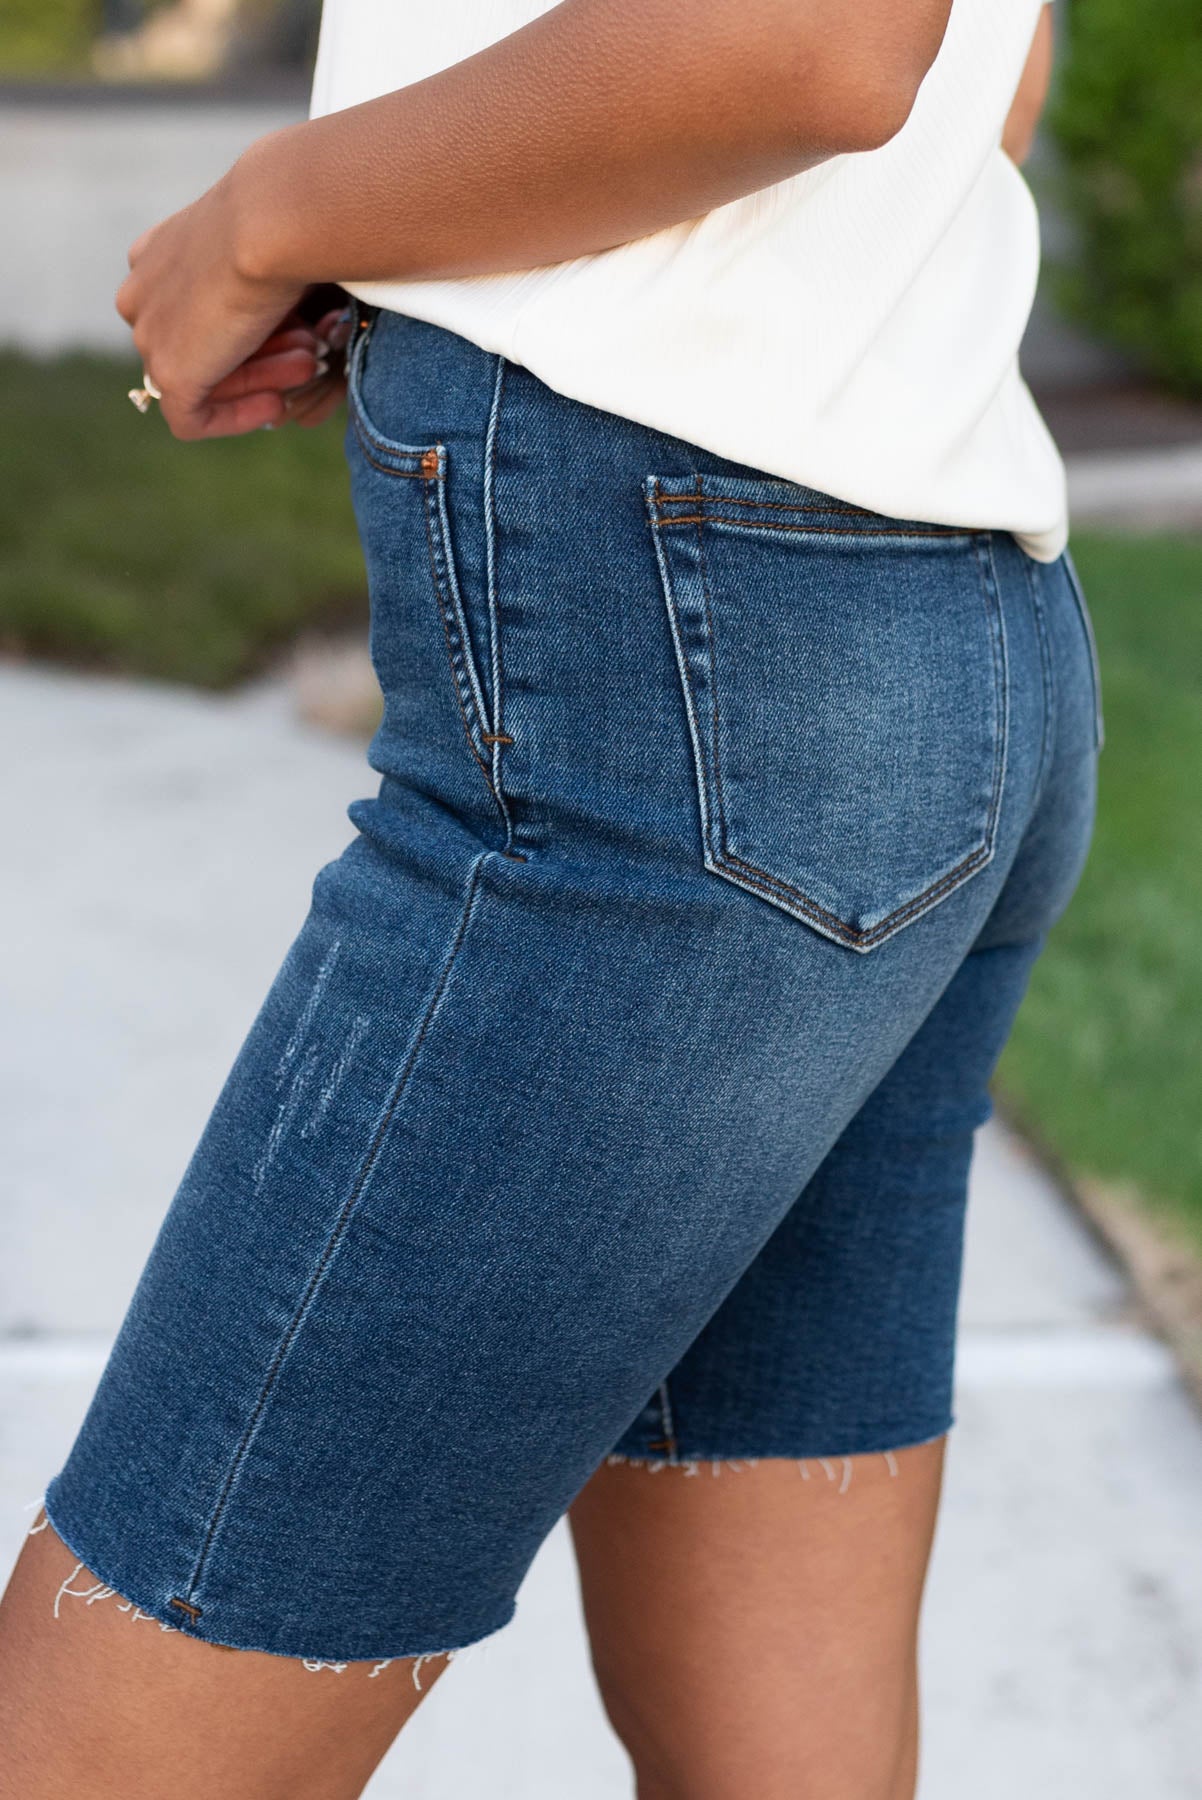 Side view of the indigo shorts with raw hem